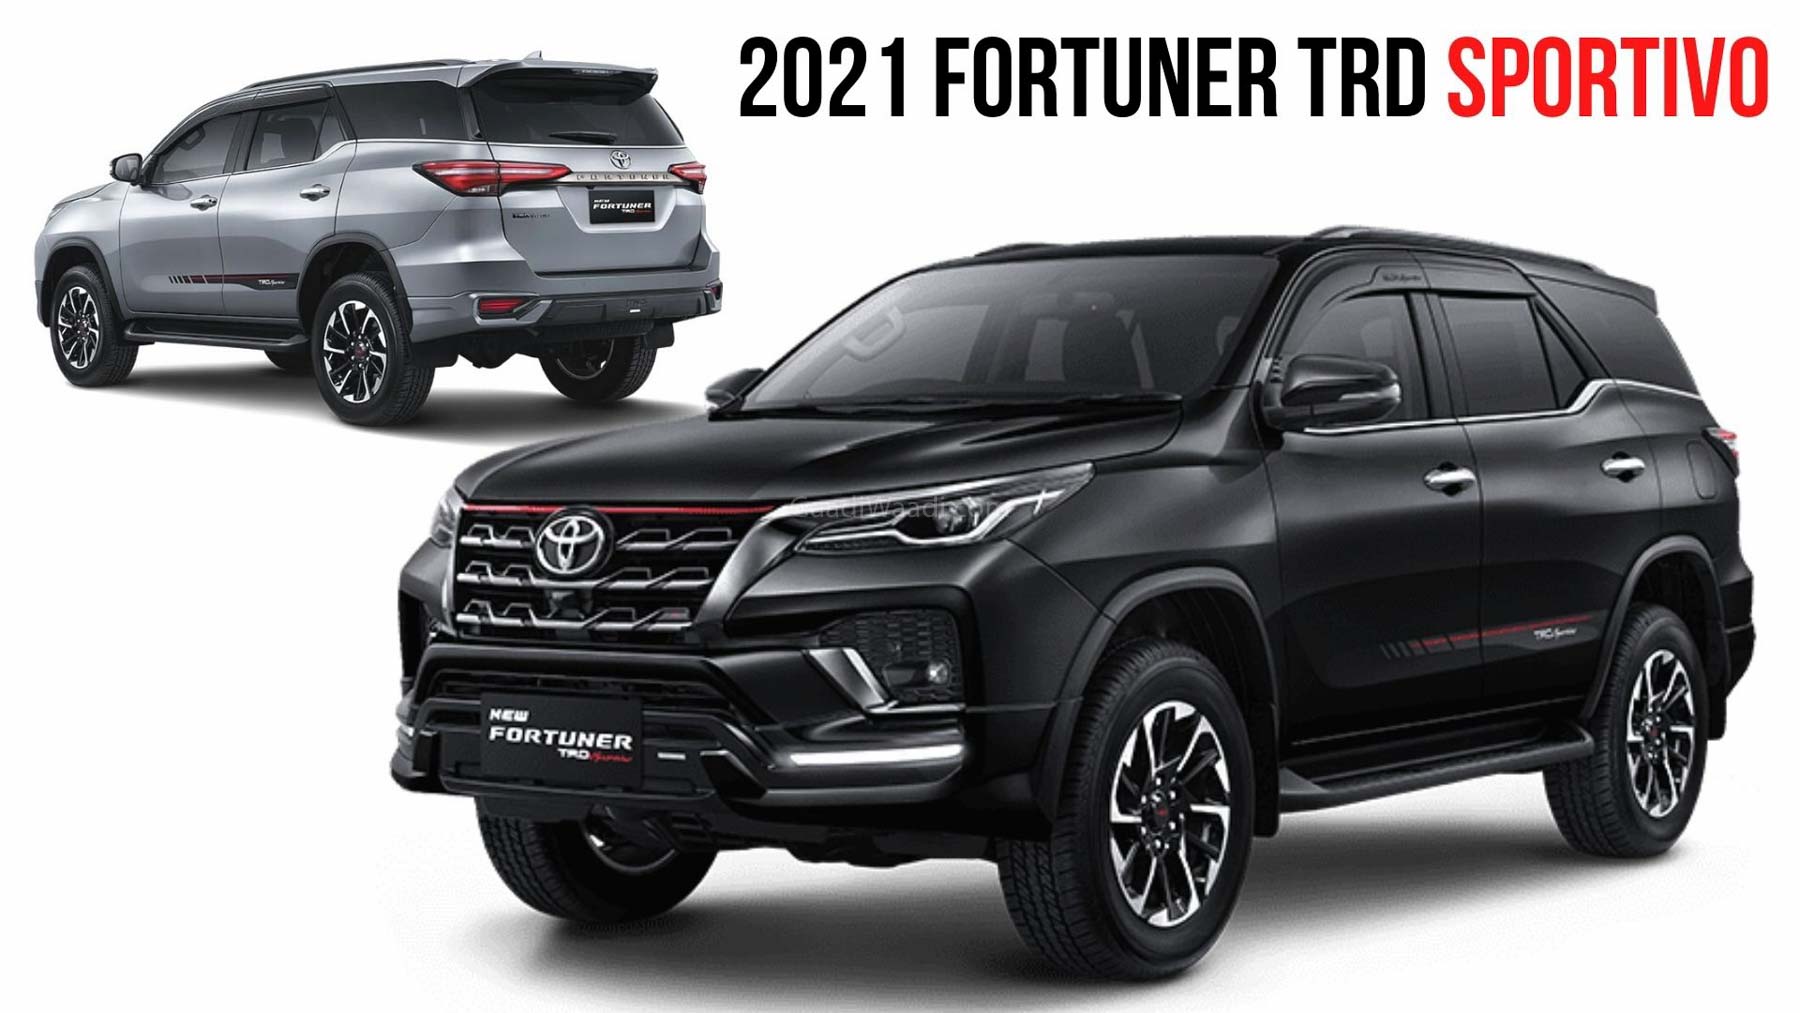  2022  Toyota Fortuner  Facelift Gets TRD  Sportivo  Trim With 